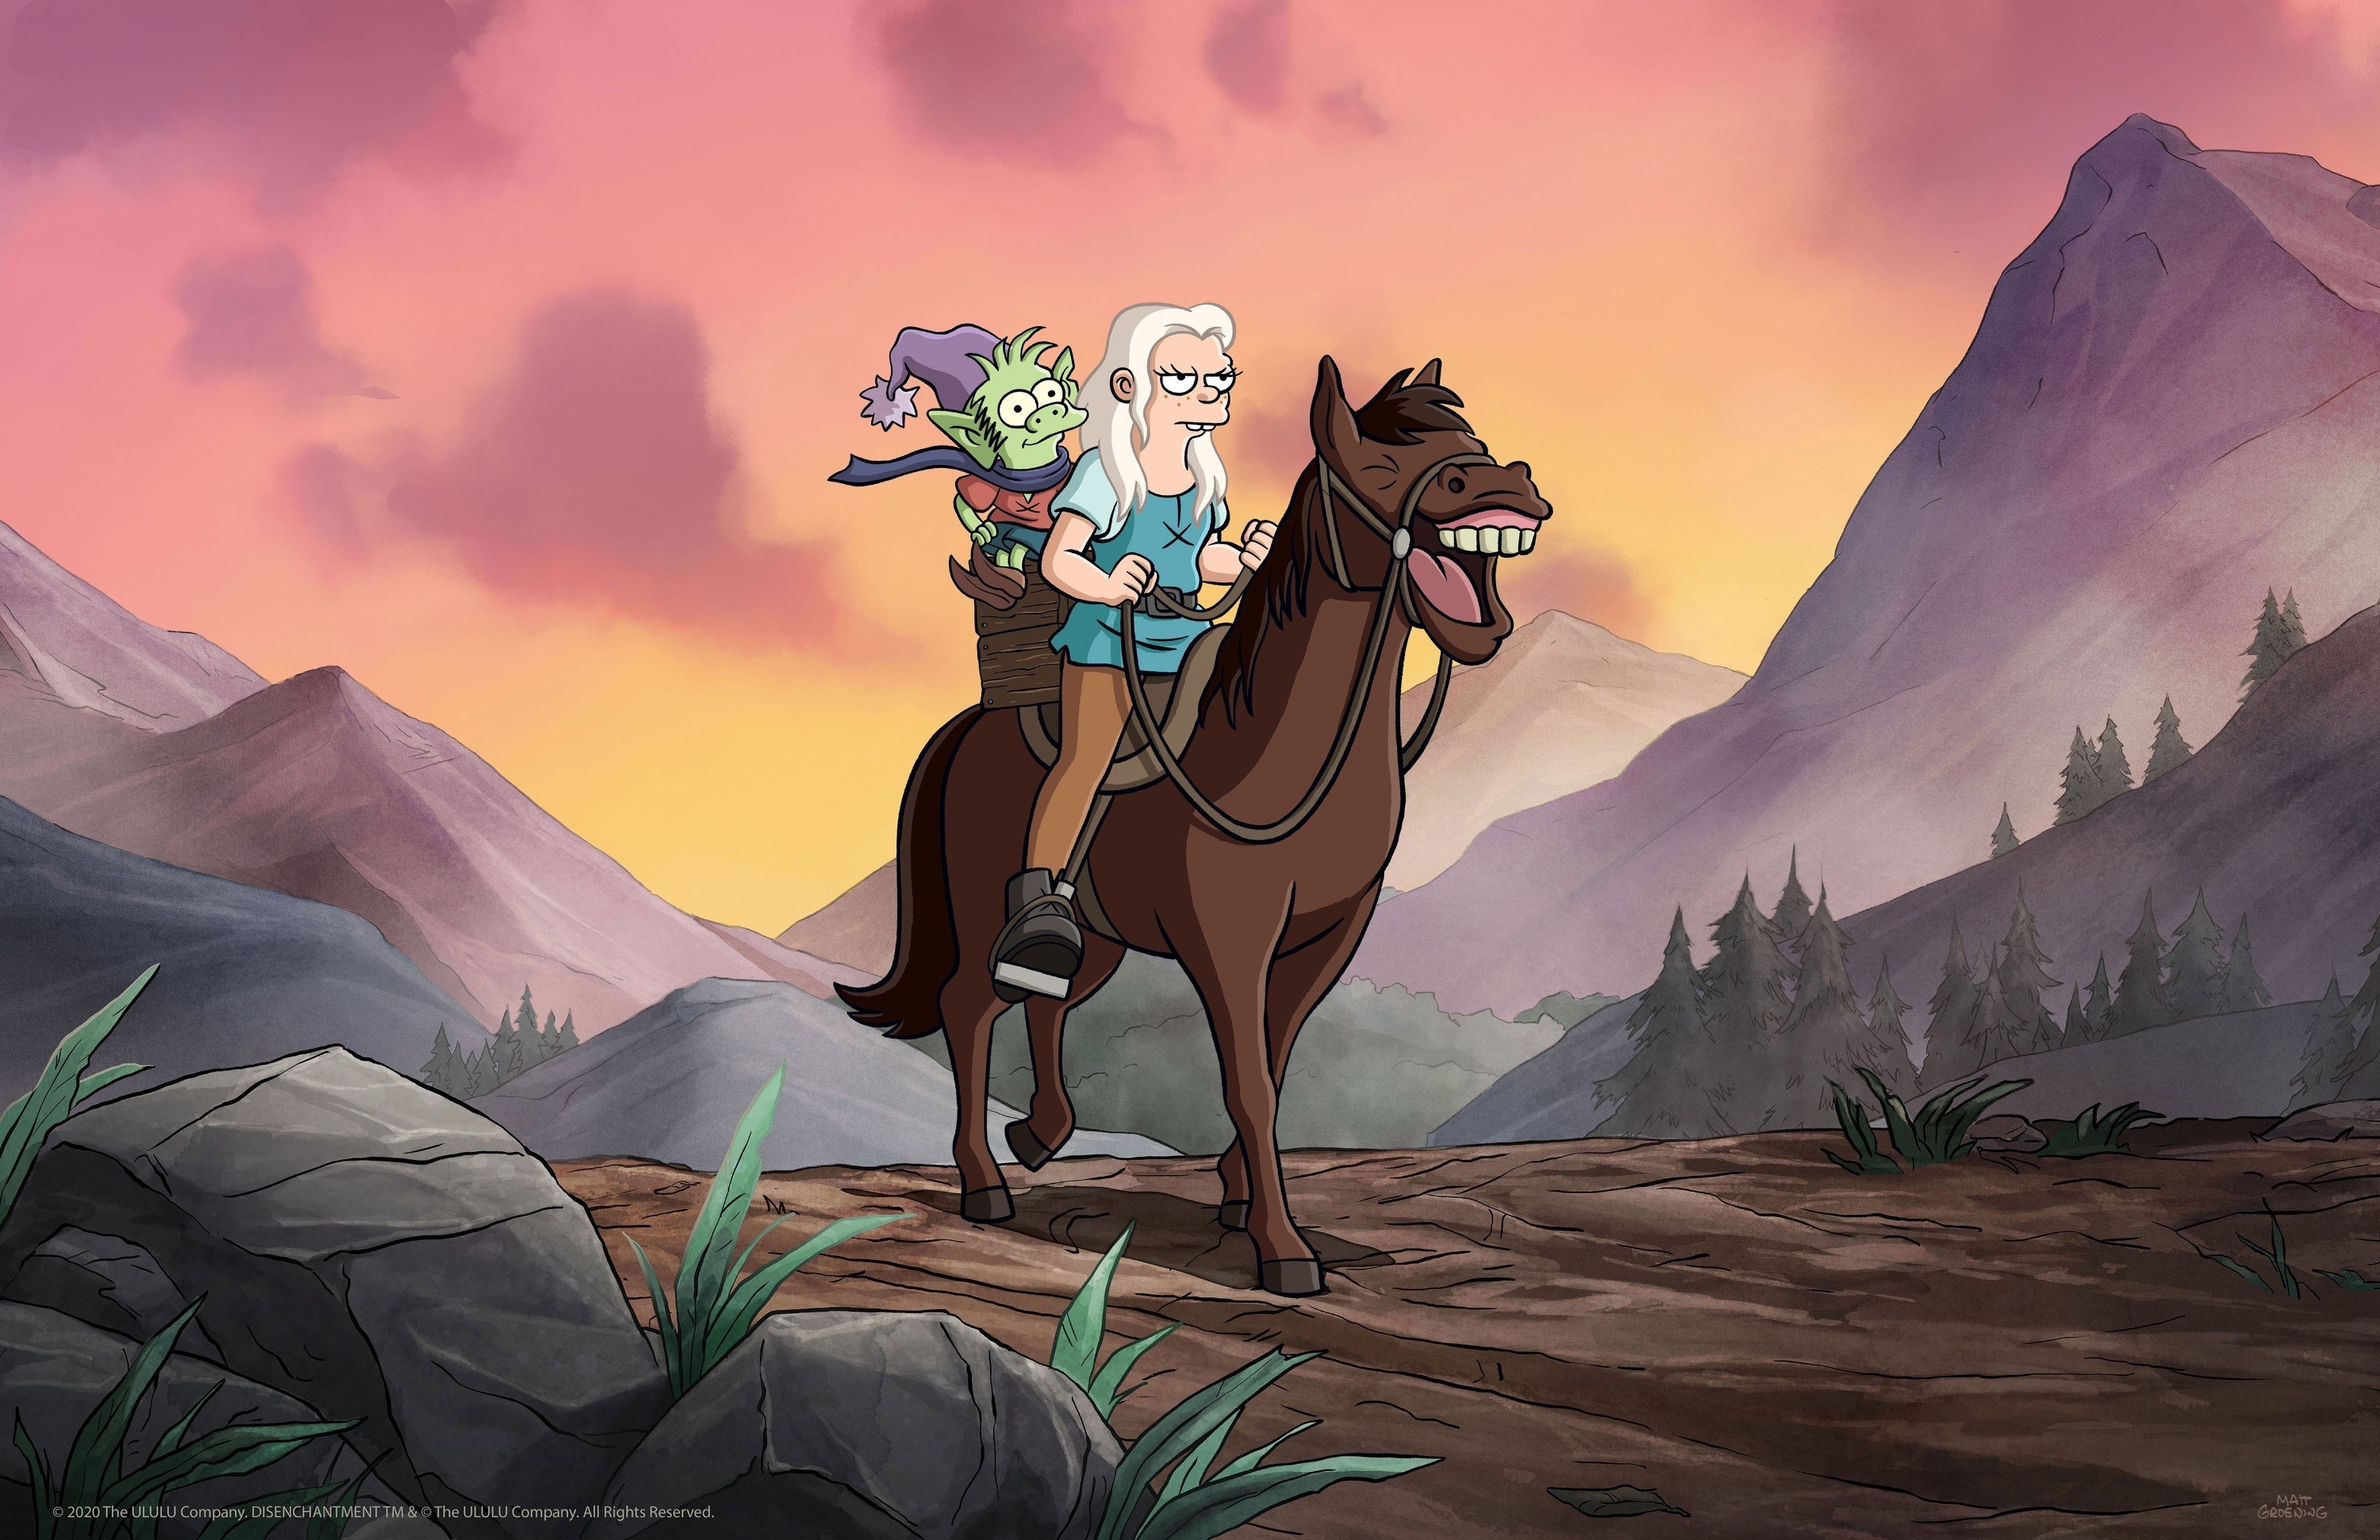 Elfo and Bean on a horse